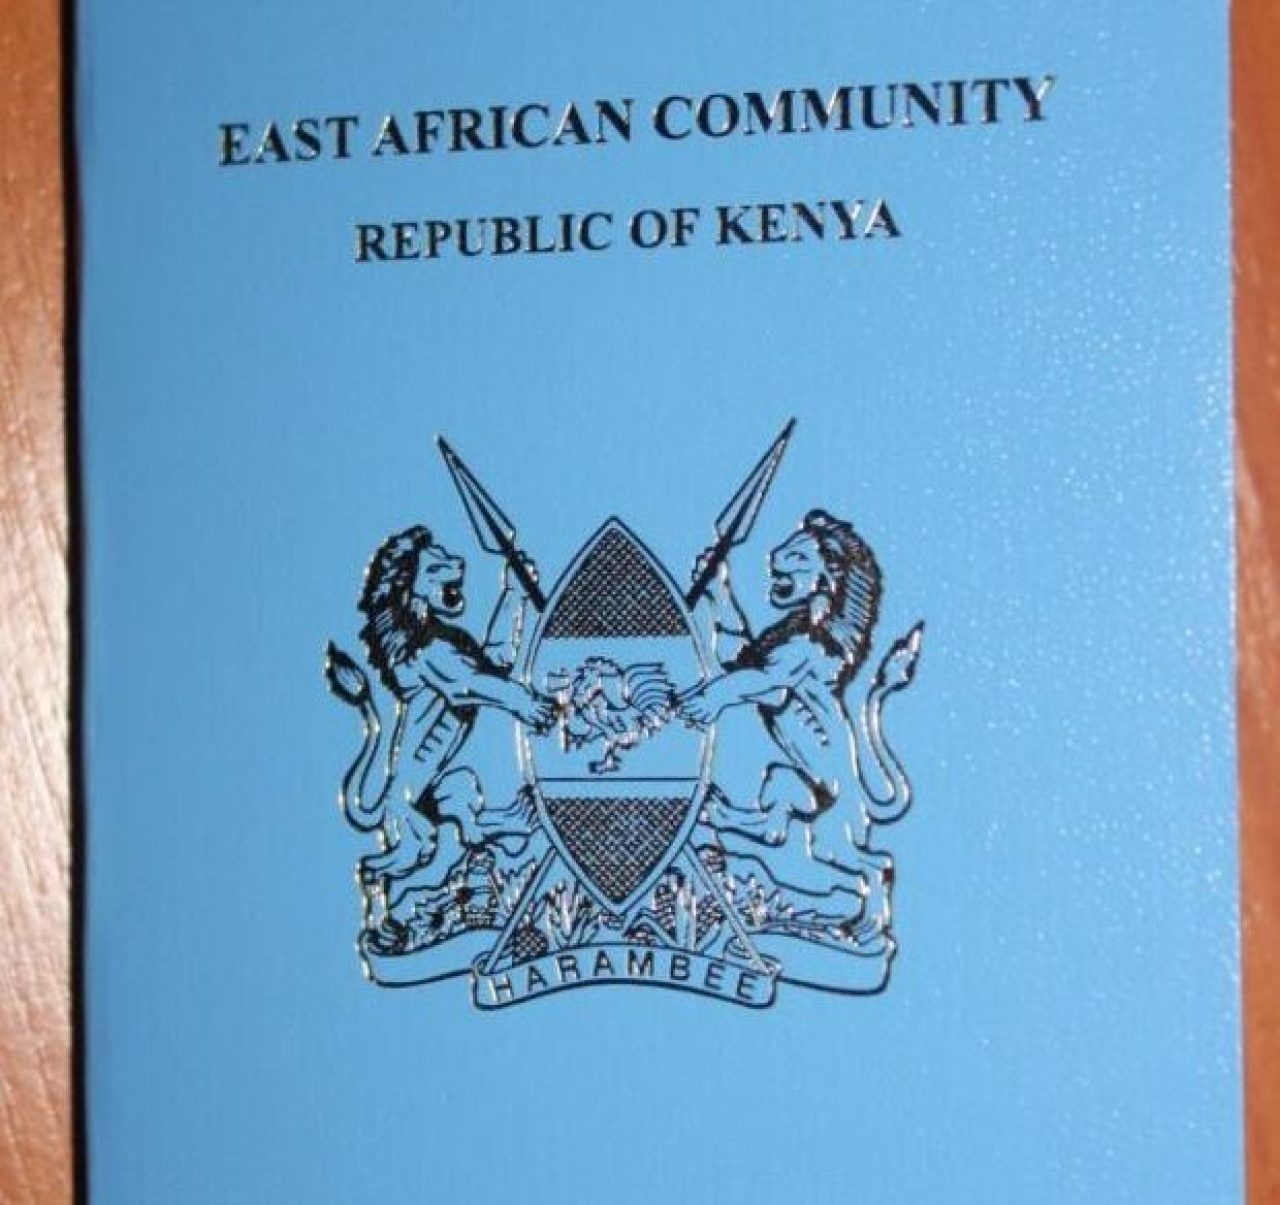 Democratic Republic of Congo Abolishes Visa Requirements for Kenyans. Afro News Wire